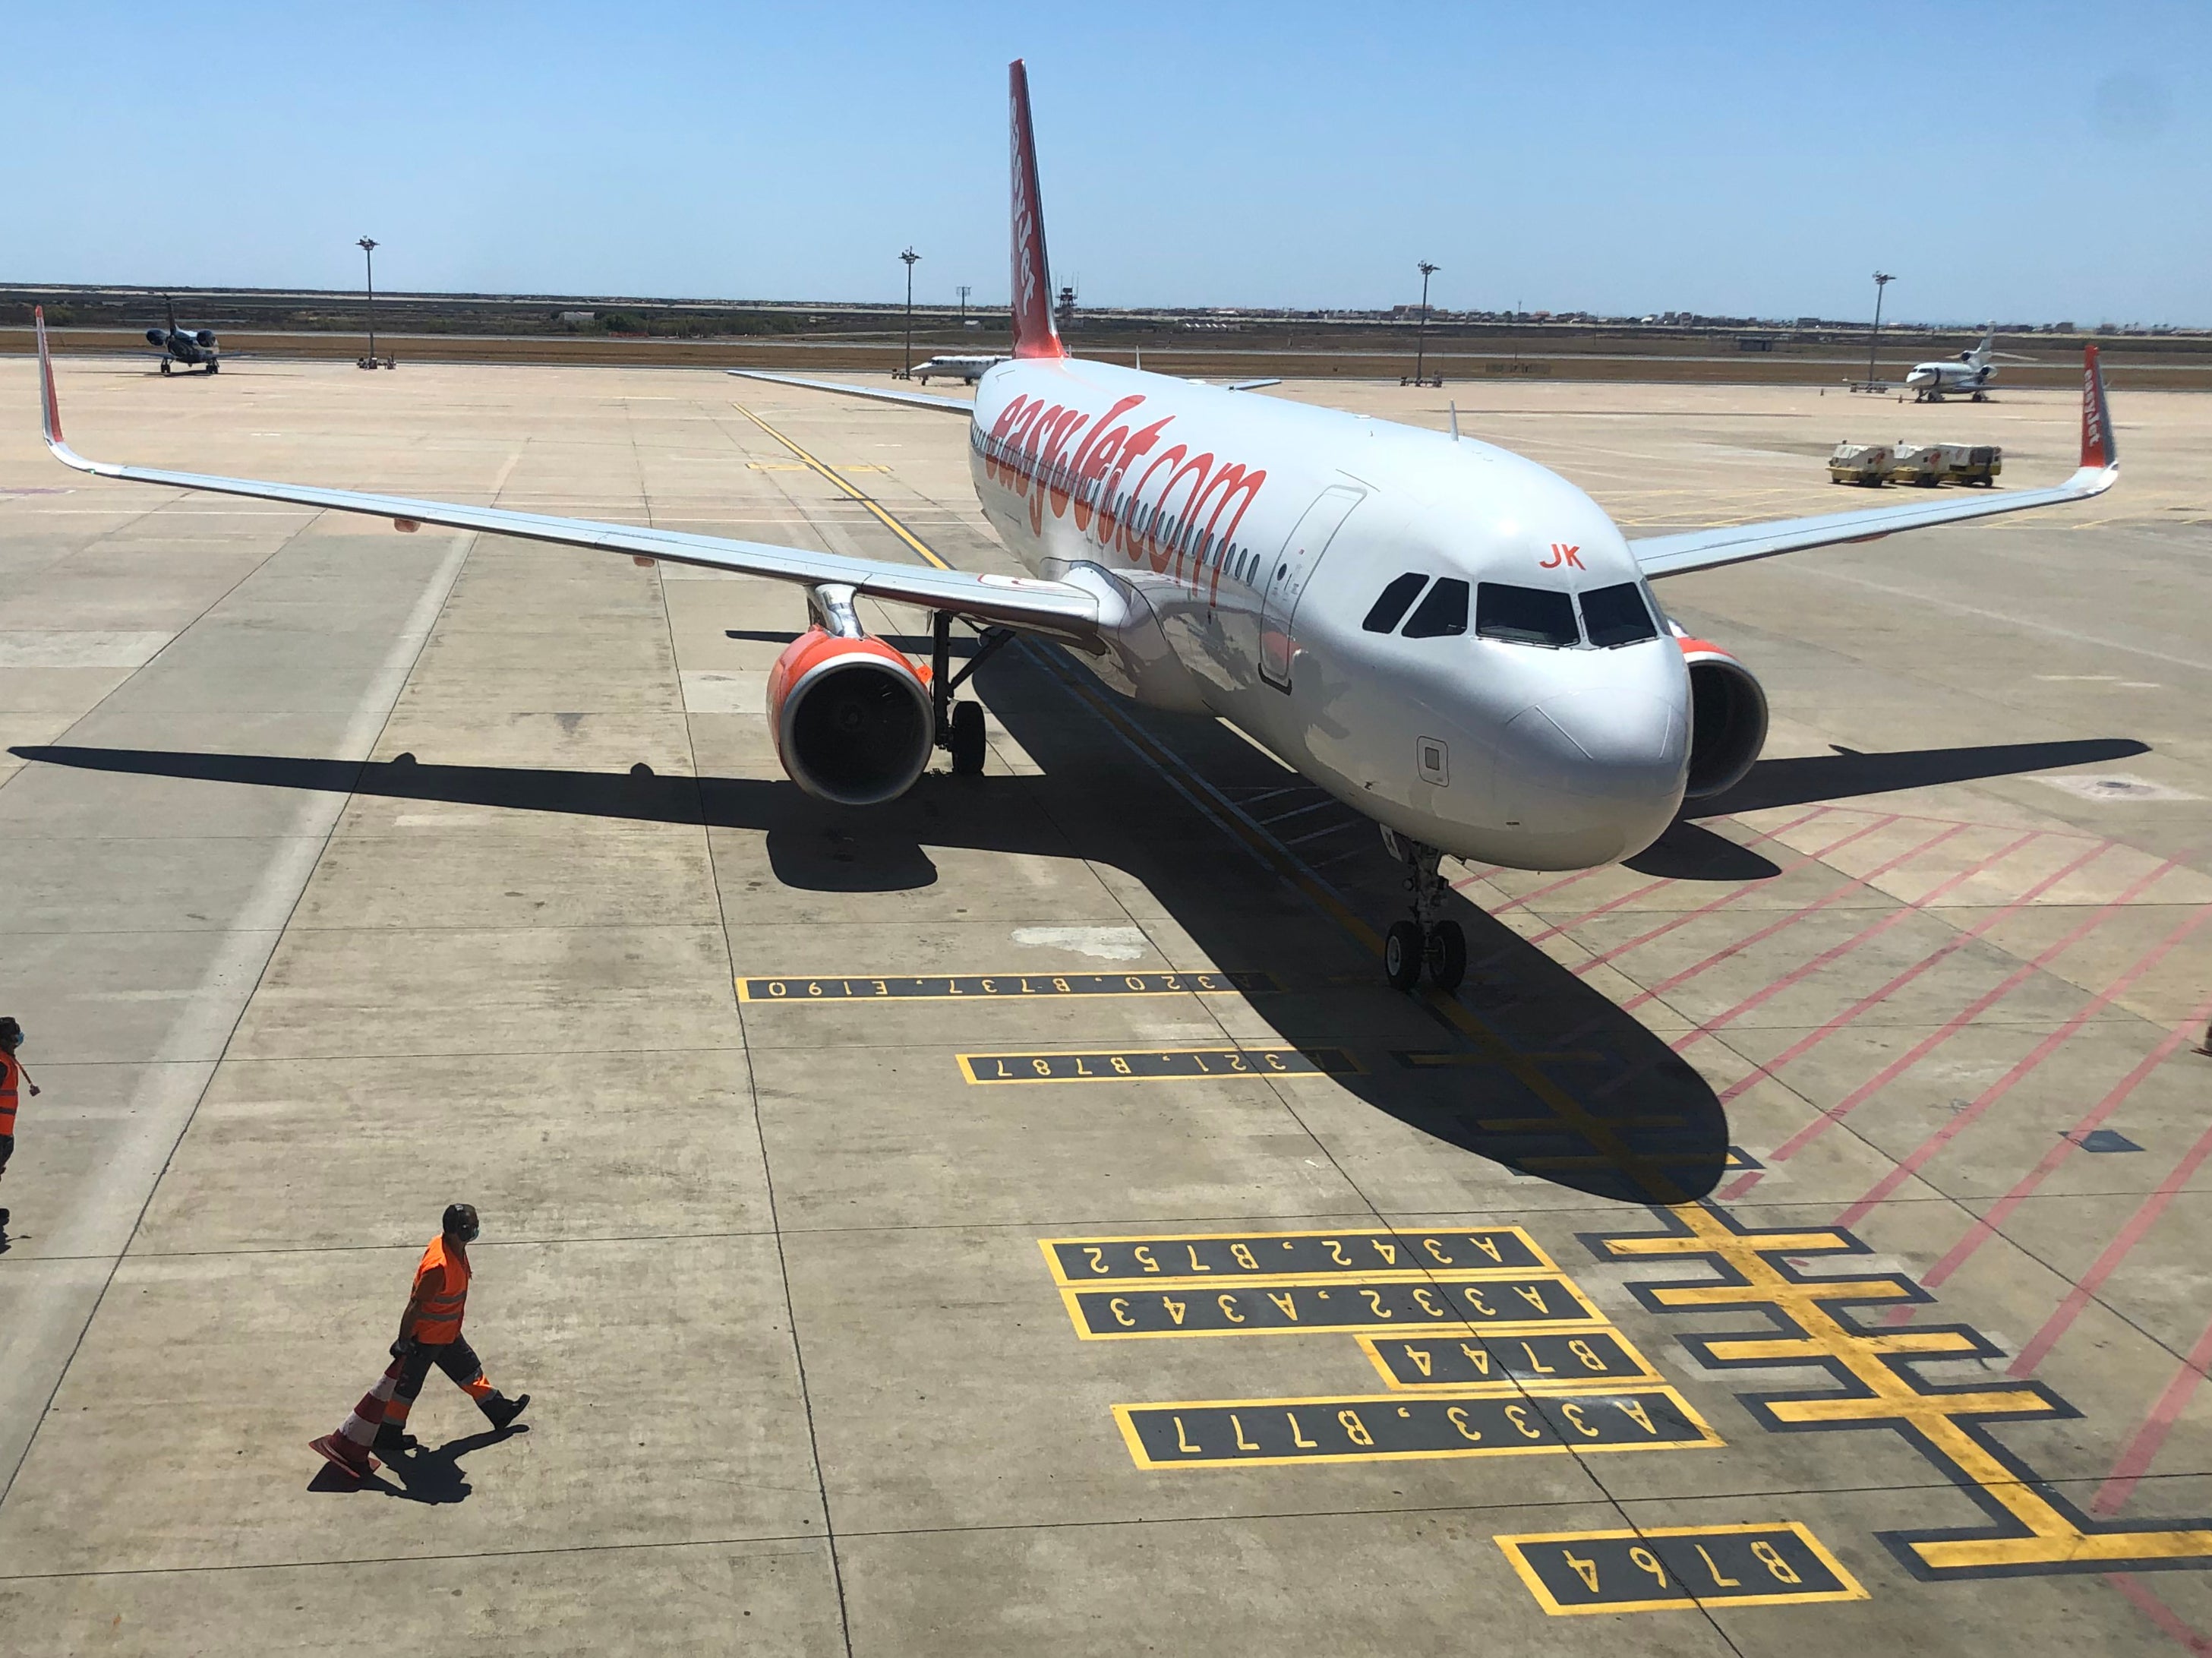 Departing soon: an easyJet Airbus A320 at Faro airport in southern Portugal